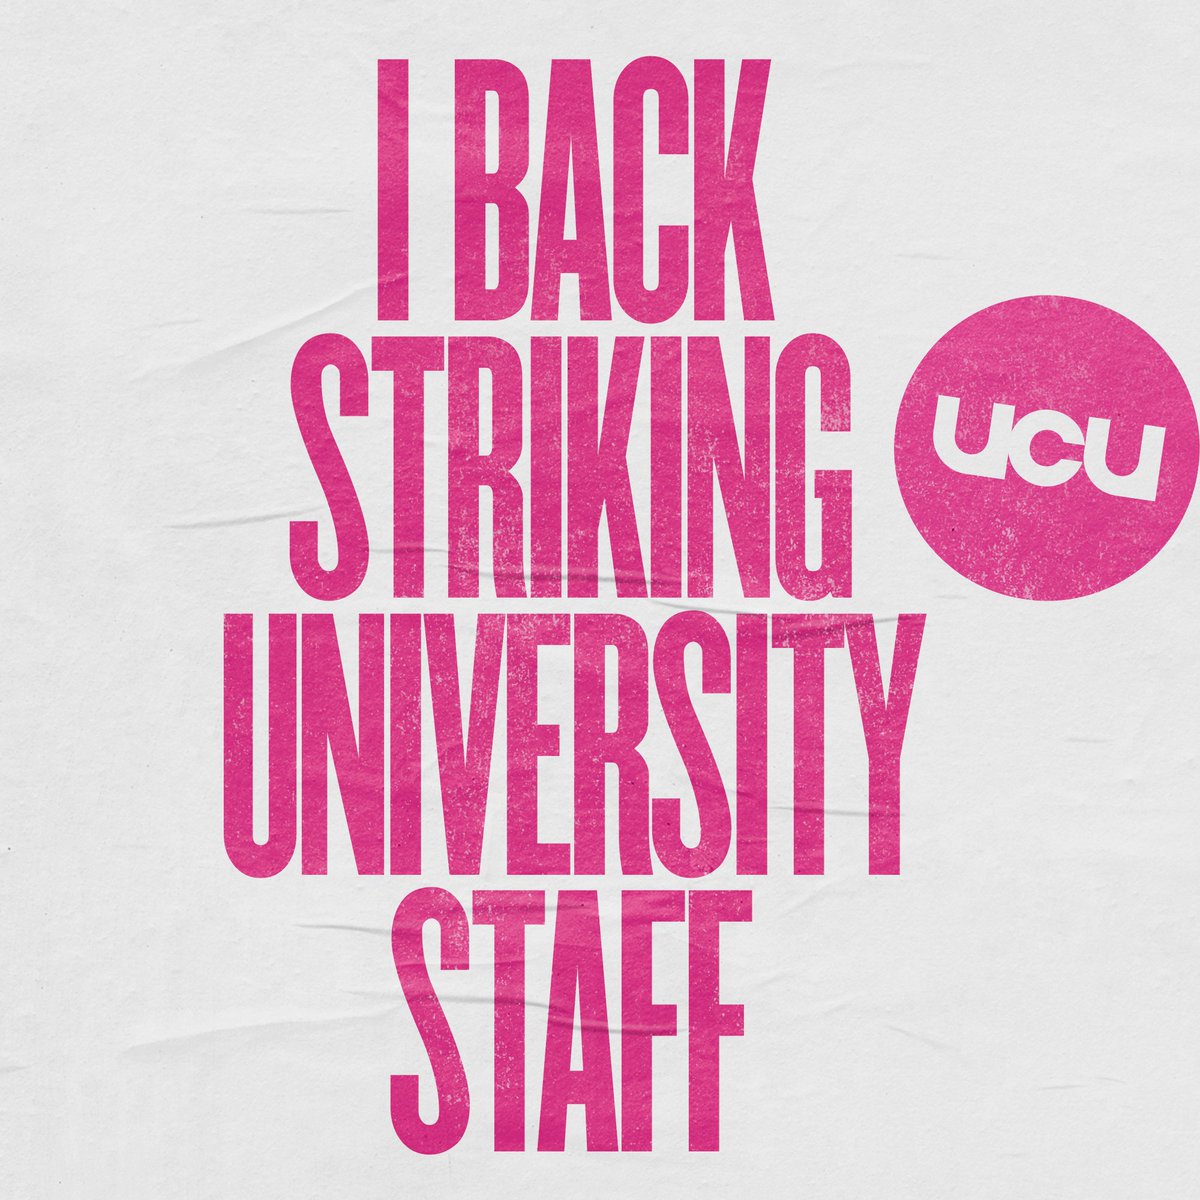 Today, university staff go on strike They are striking for decent pay, pensions and secure employment They are striking for students They are striking for the future of higher education RT IF YOU BACK THEM #ucuRISING